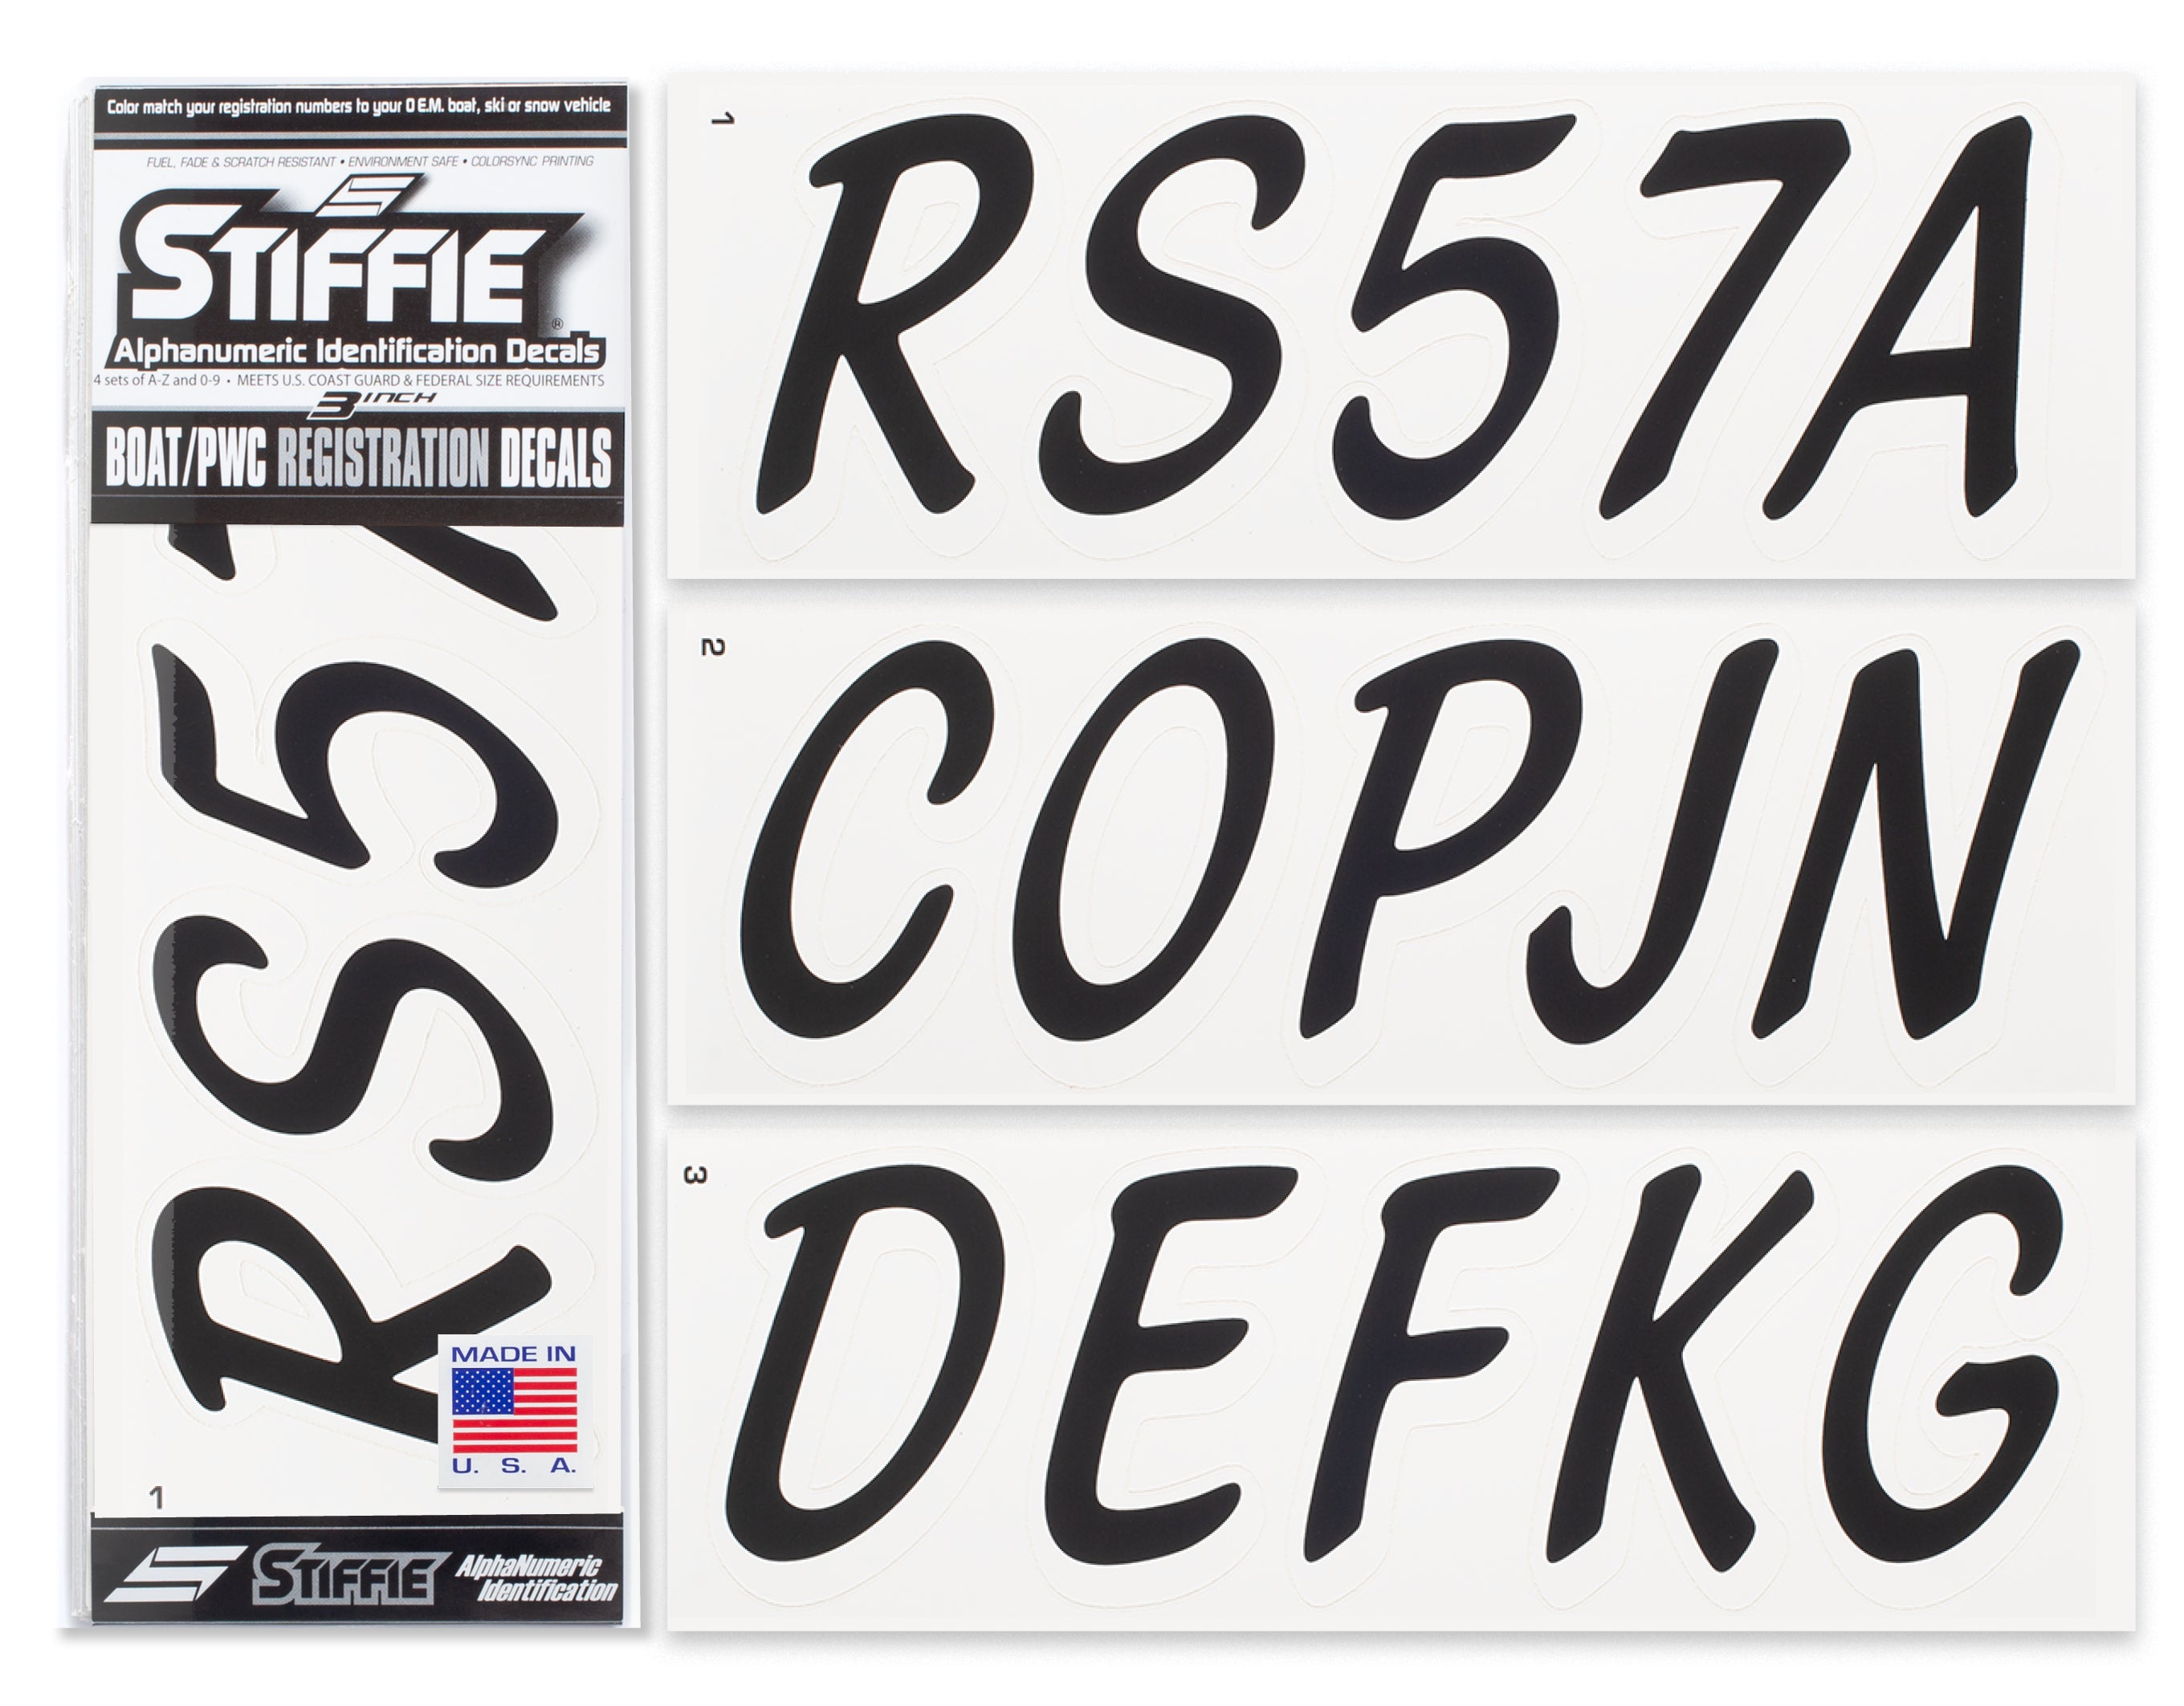 STIFFIE Whipline Solid Black/White 3" Alpha-Numeric Registration Identification Numbers Stickers Decals for Boats & Personal Watercraft